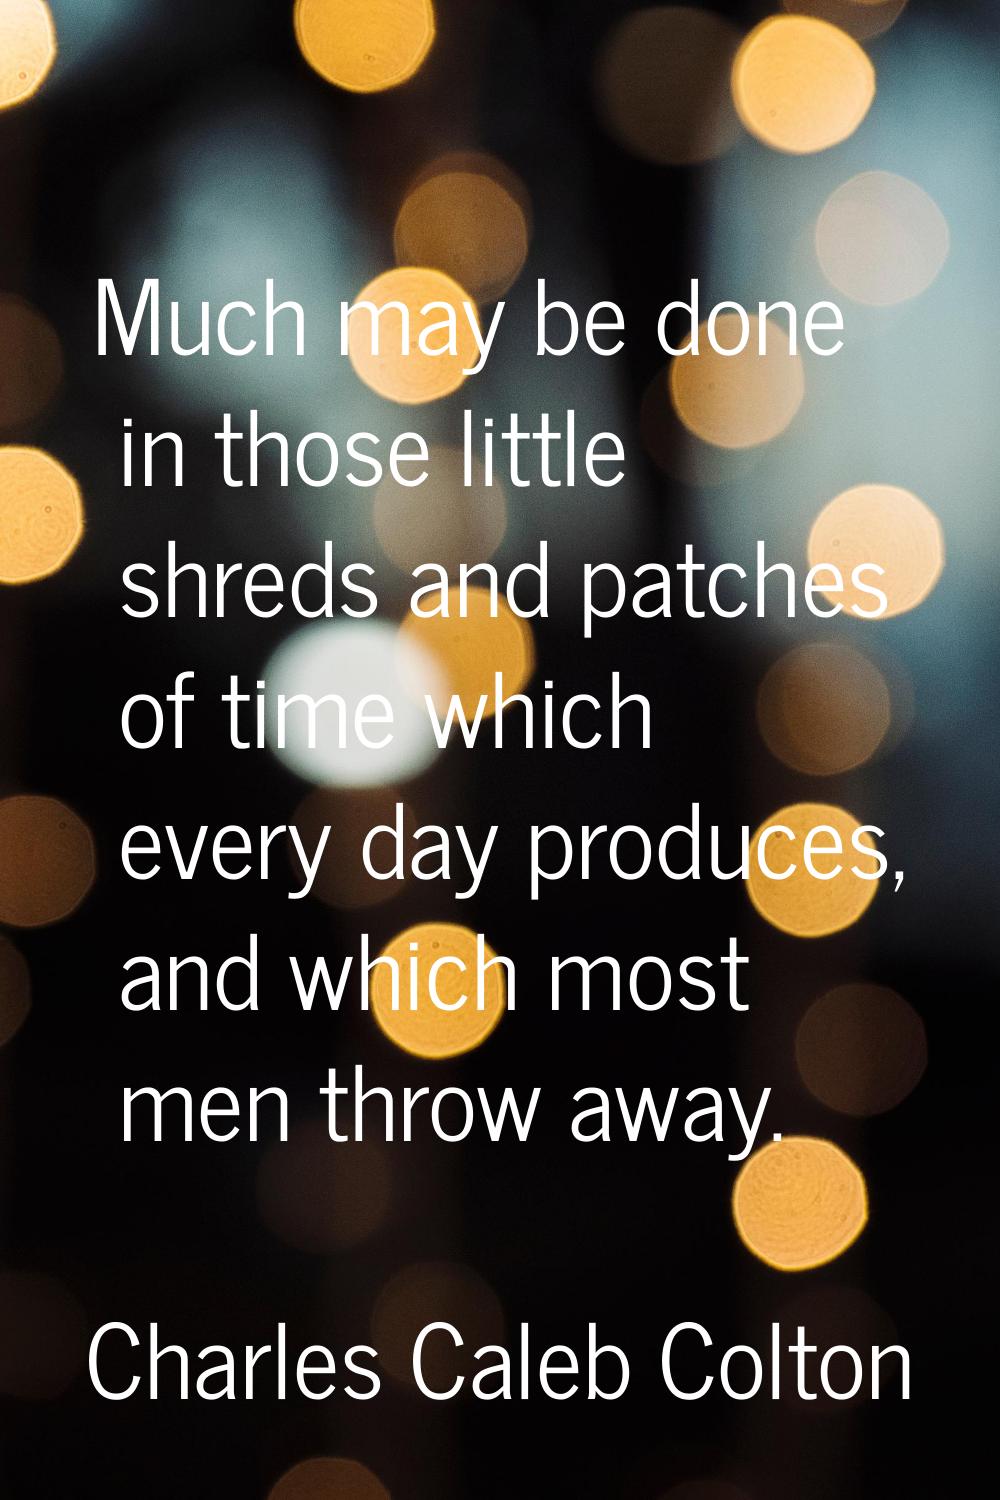 Much may be done in those little shreds and patches of time which every day produces, and which mos